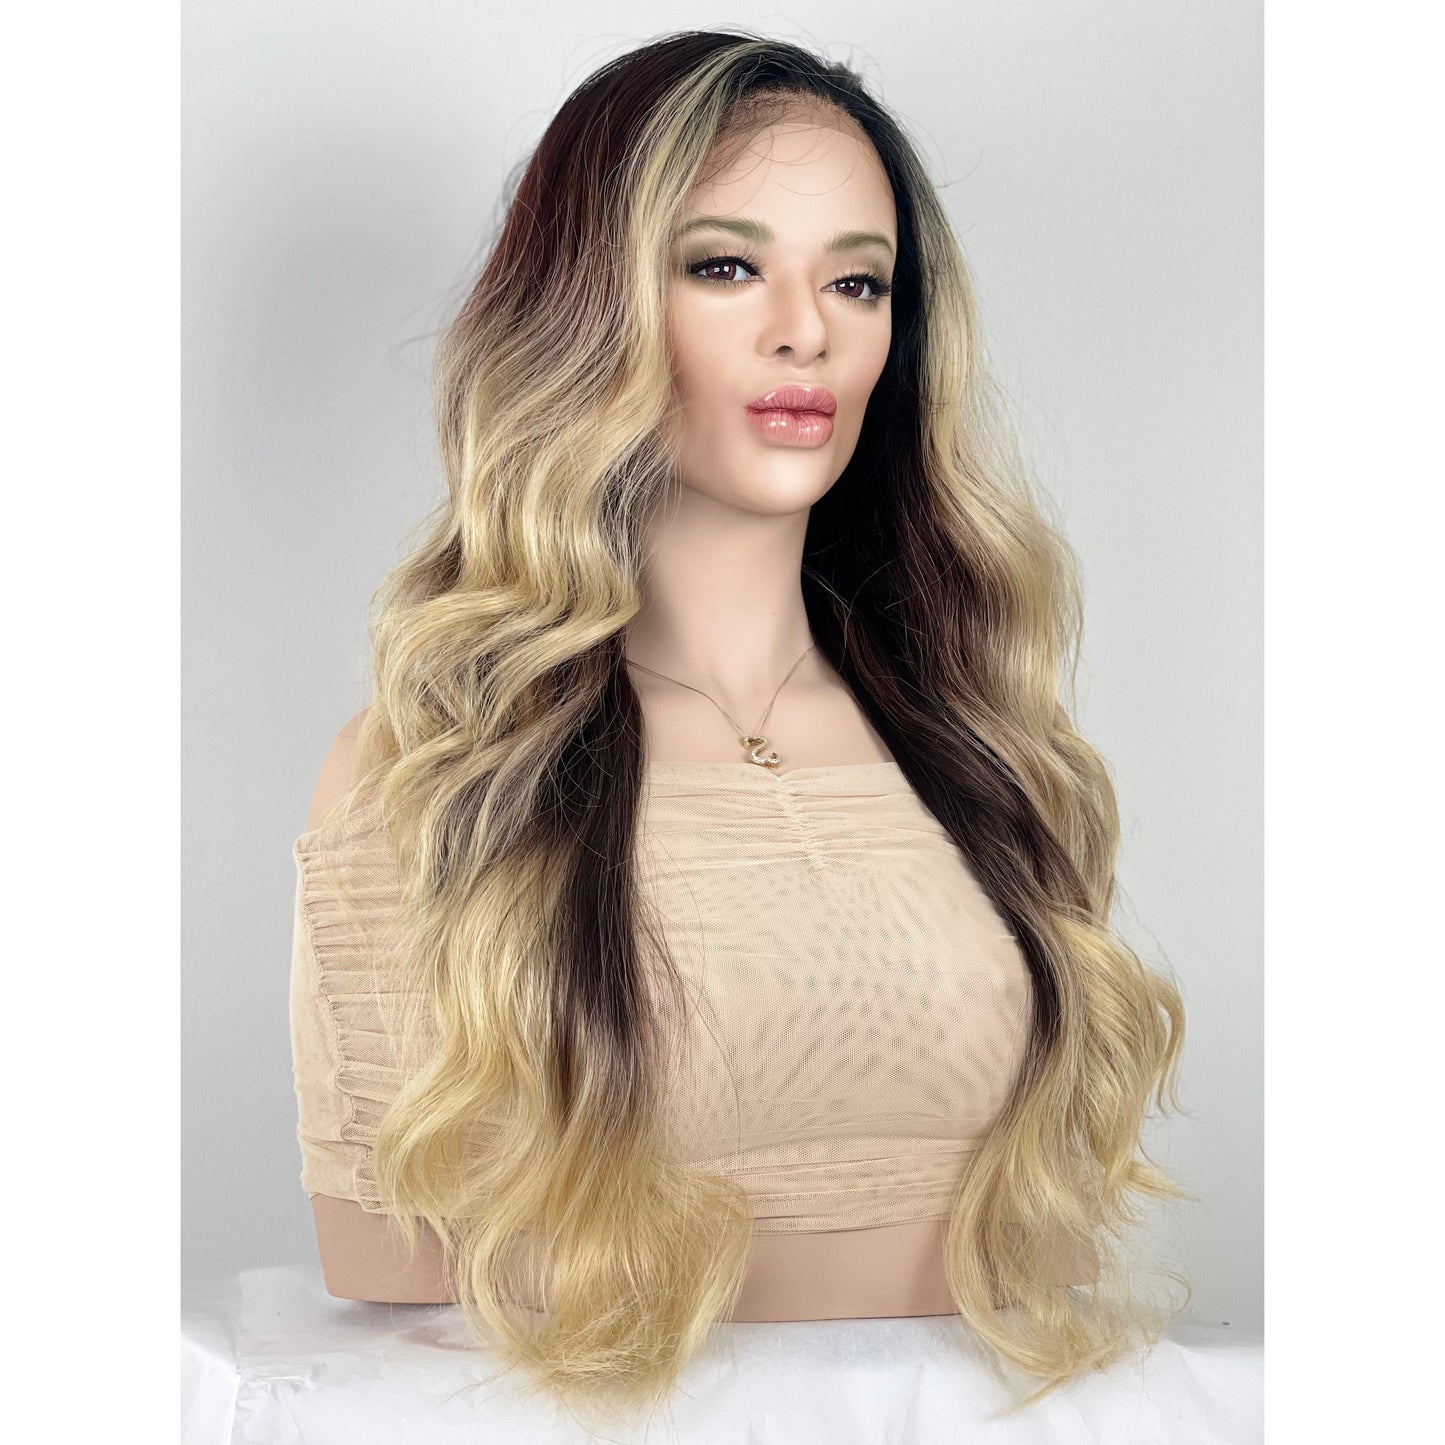 Blonde Brown Balayage Wavy Ombré Wig | Blonde Long Wig Human Hair Blend Lace Front Wig | 13x6” Free Parting Multi-Directional Layered Wig